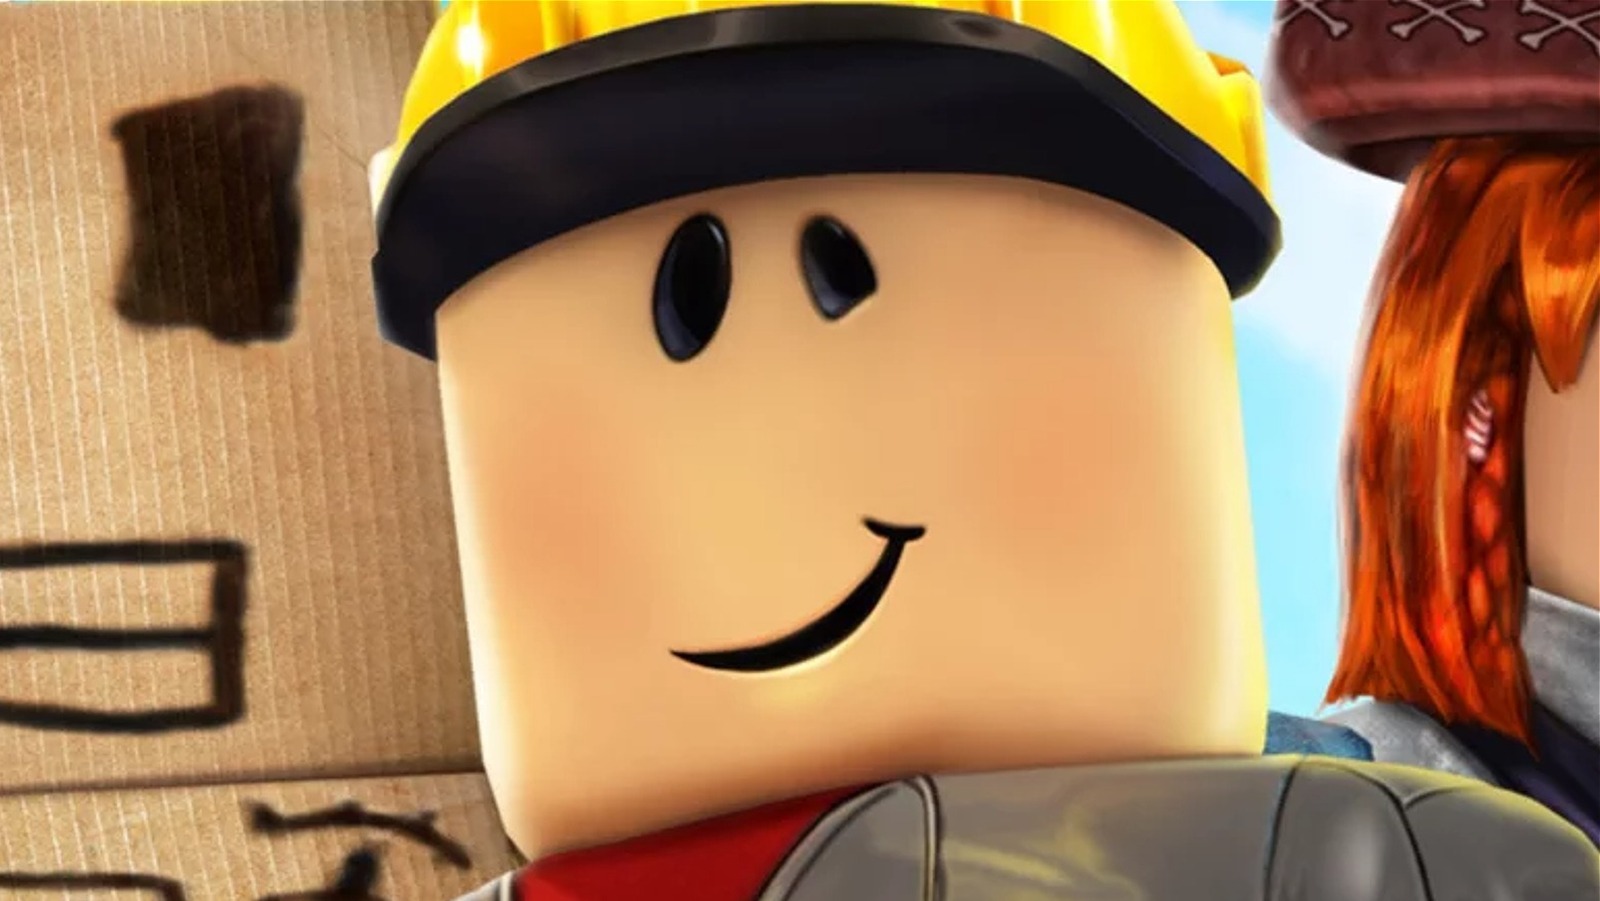 Top 10 Best Roblox Games to play with Friends 